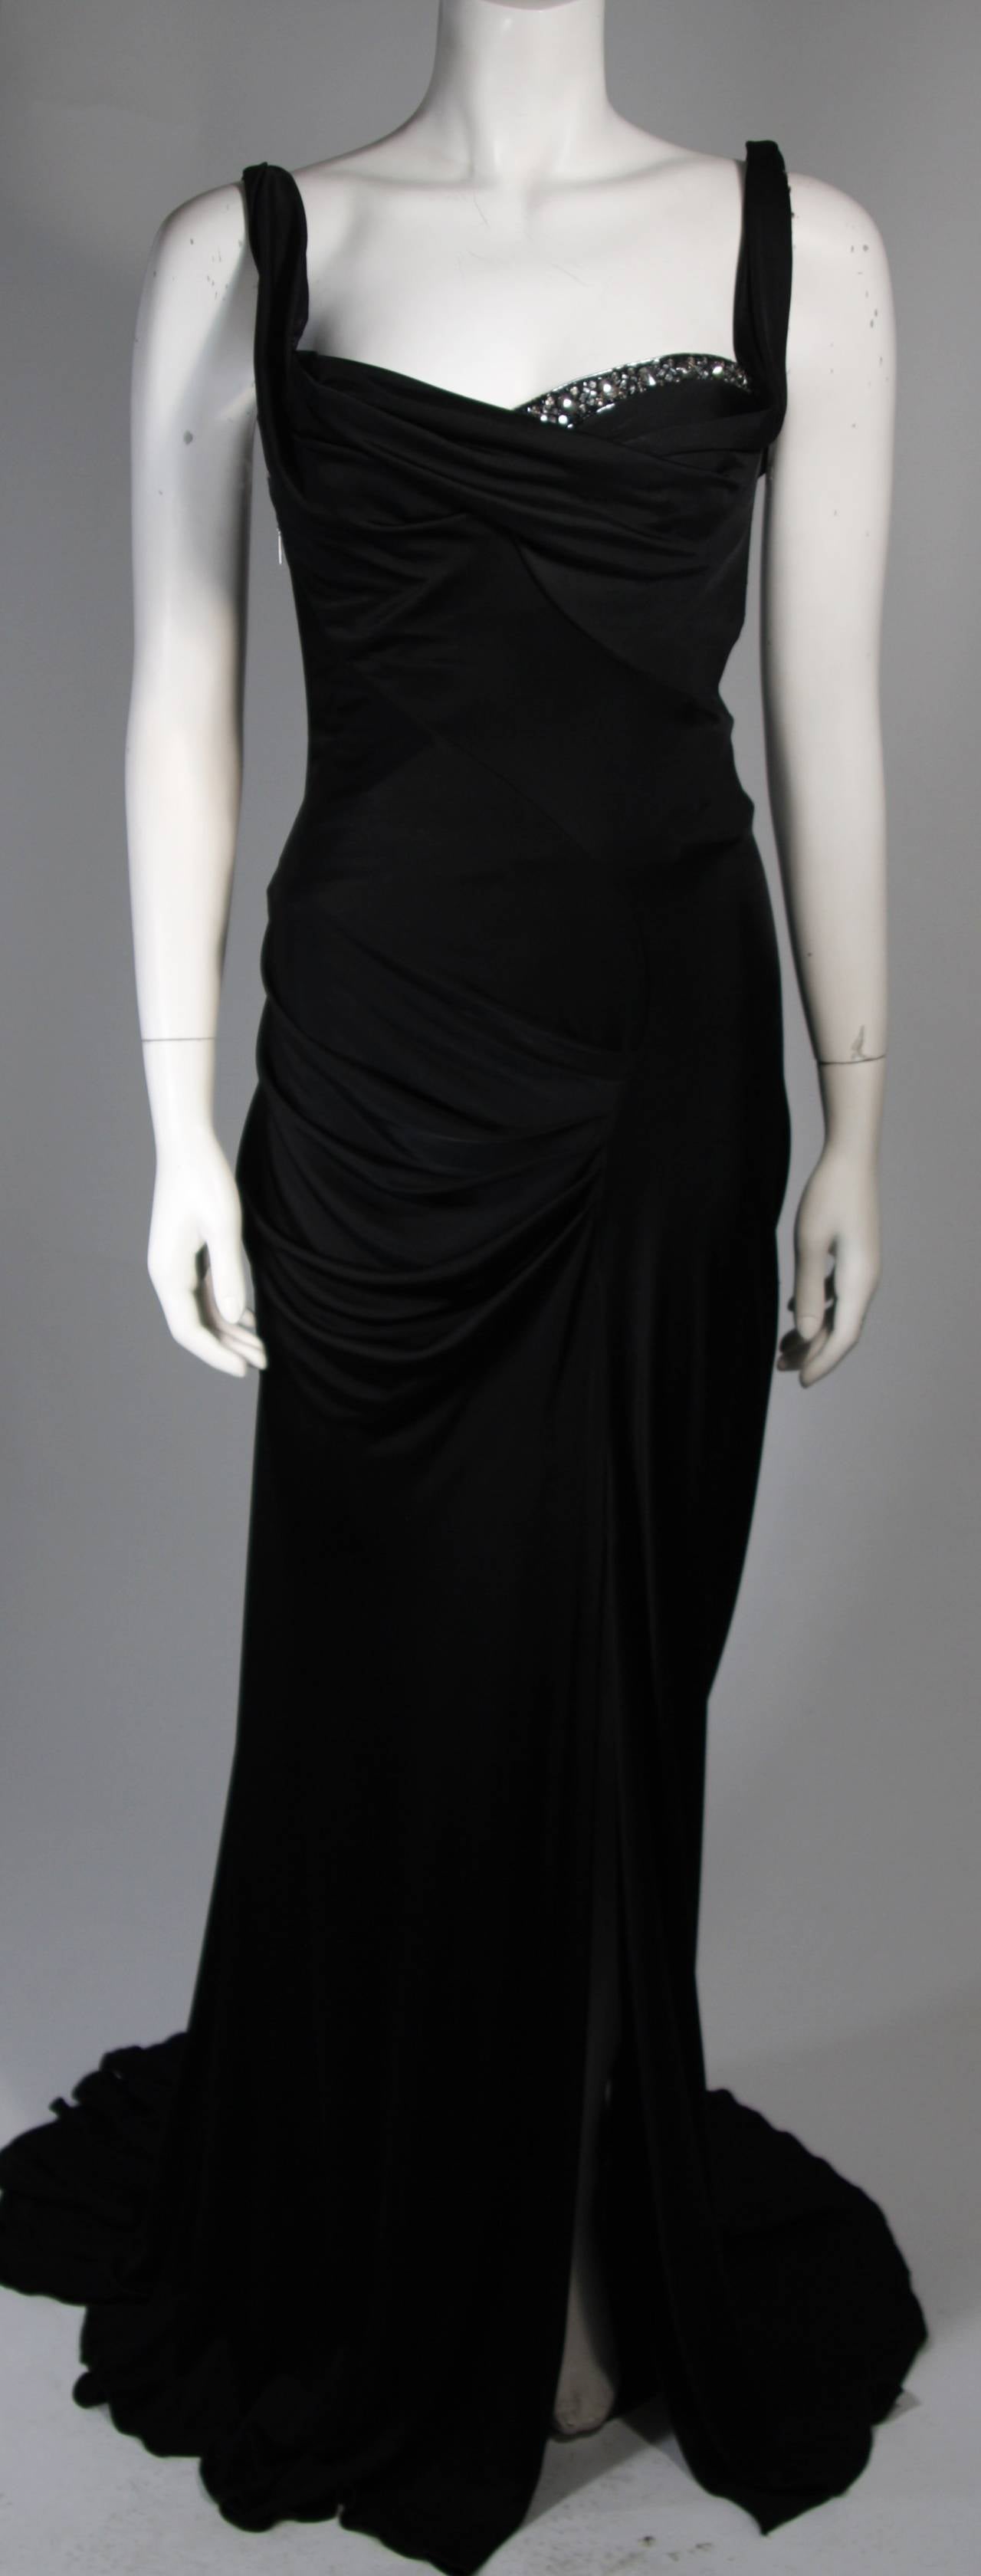 This Roberto Cavalli design is available for viewing at our Beverly Hills Boutique. We offer a large selection of evening gowns and luxury garments.

This gown is composed of a black stretch jersey and features rhinestone adornments along the